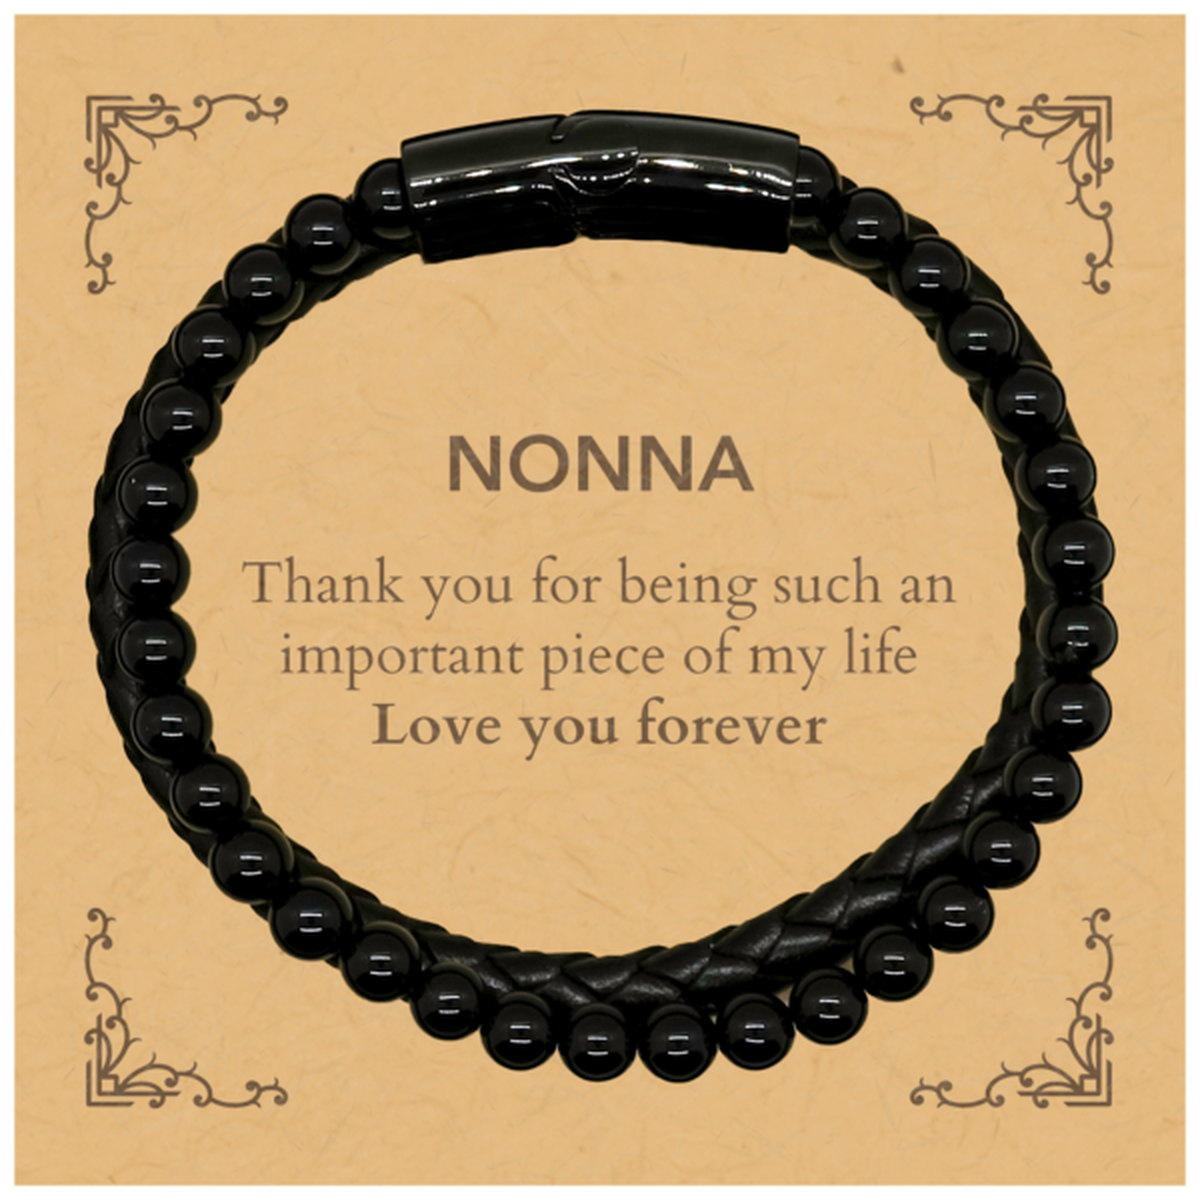 Appropriate Nonna Stone Leather Bracelets Epic Birthday Gifts for Nonna Thank you for being such an important piece of my life Nonna Christmas Mothers Fathers Day